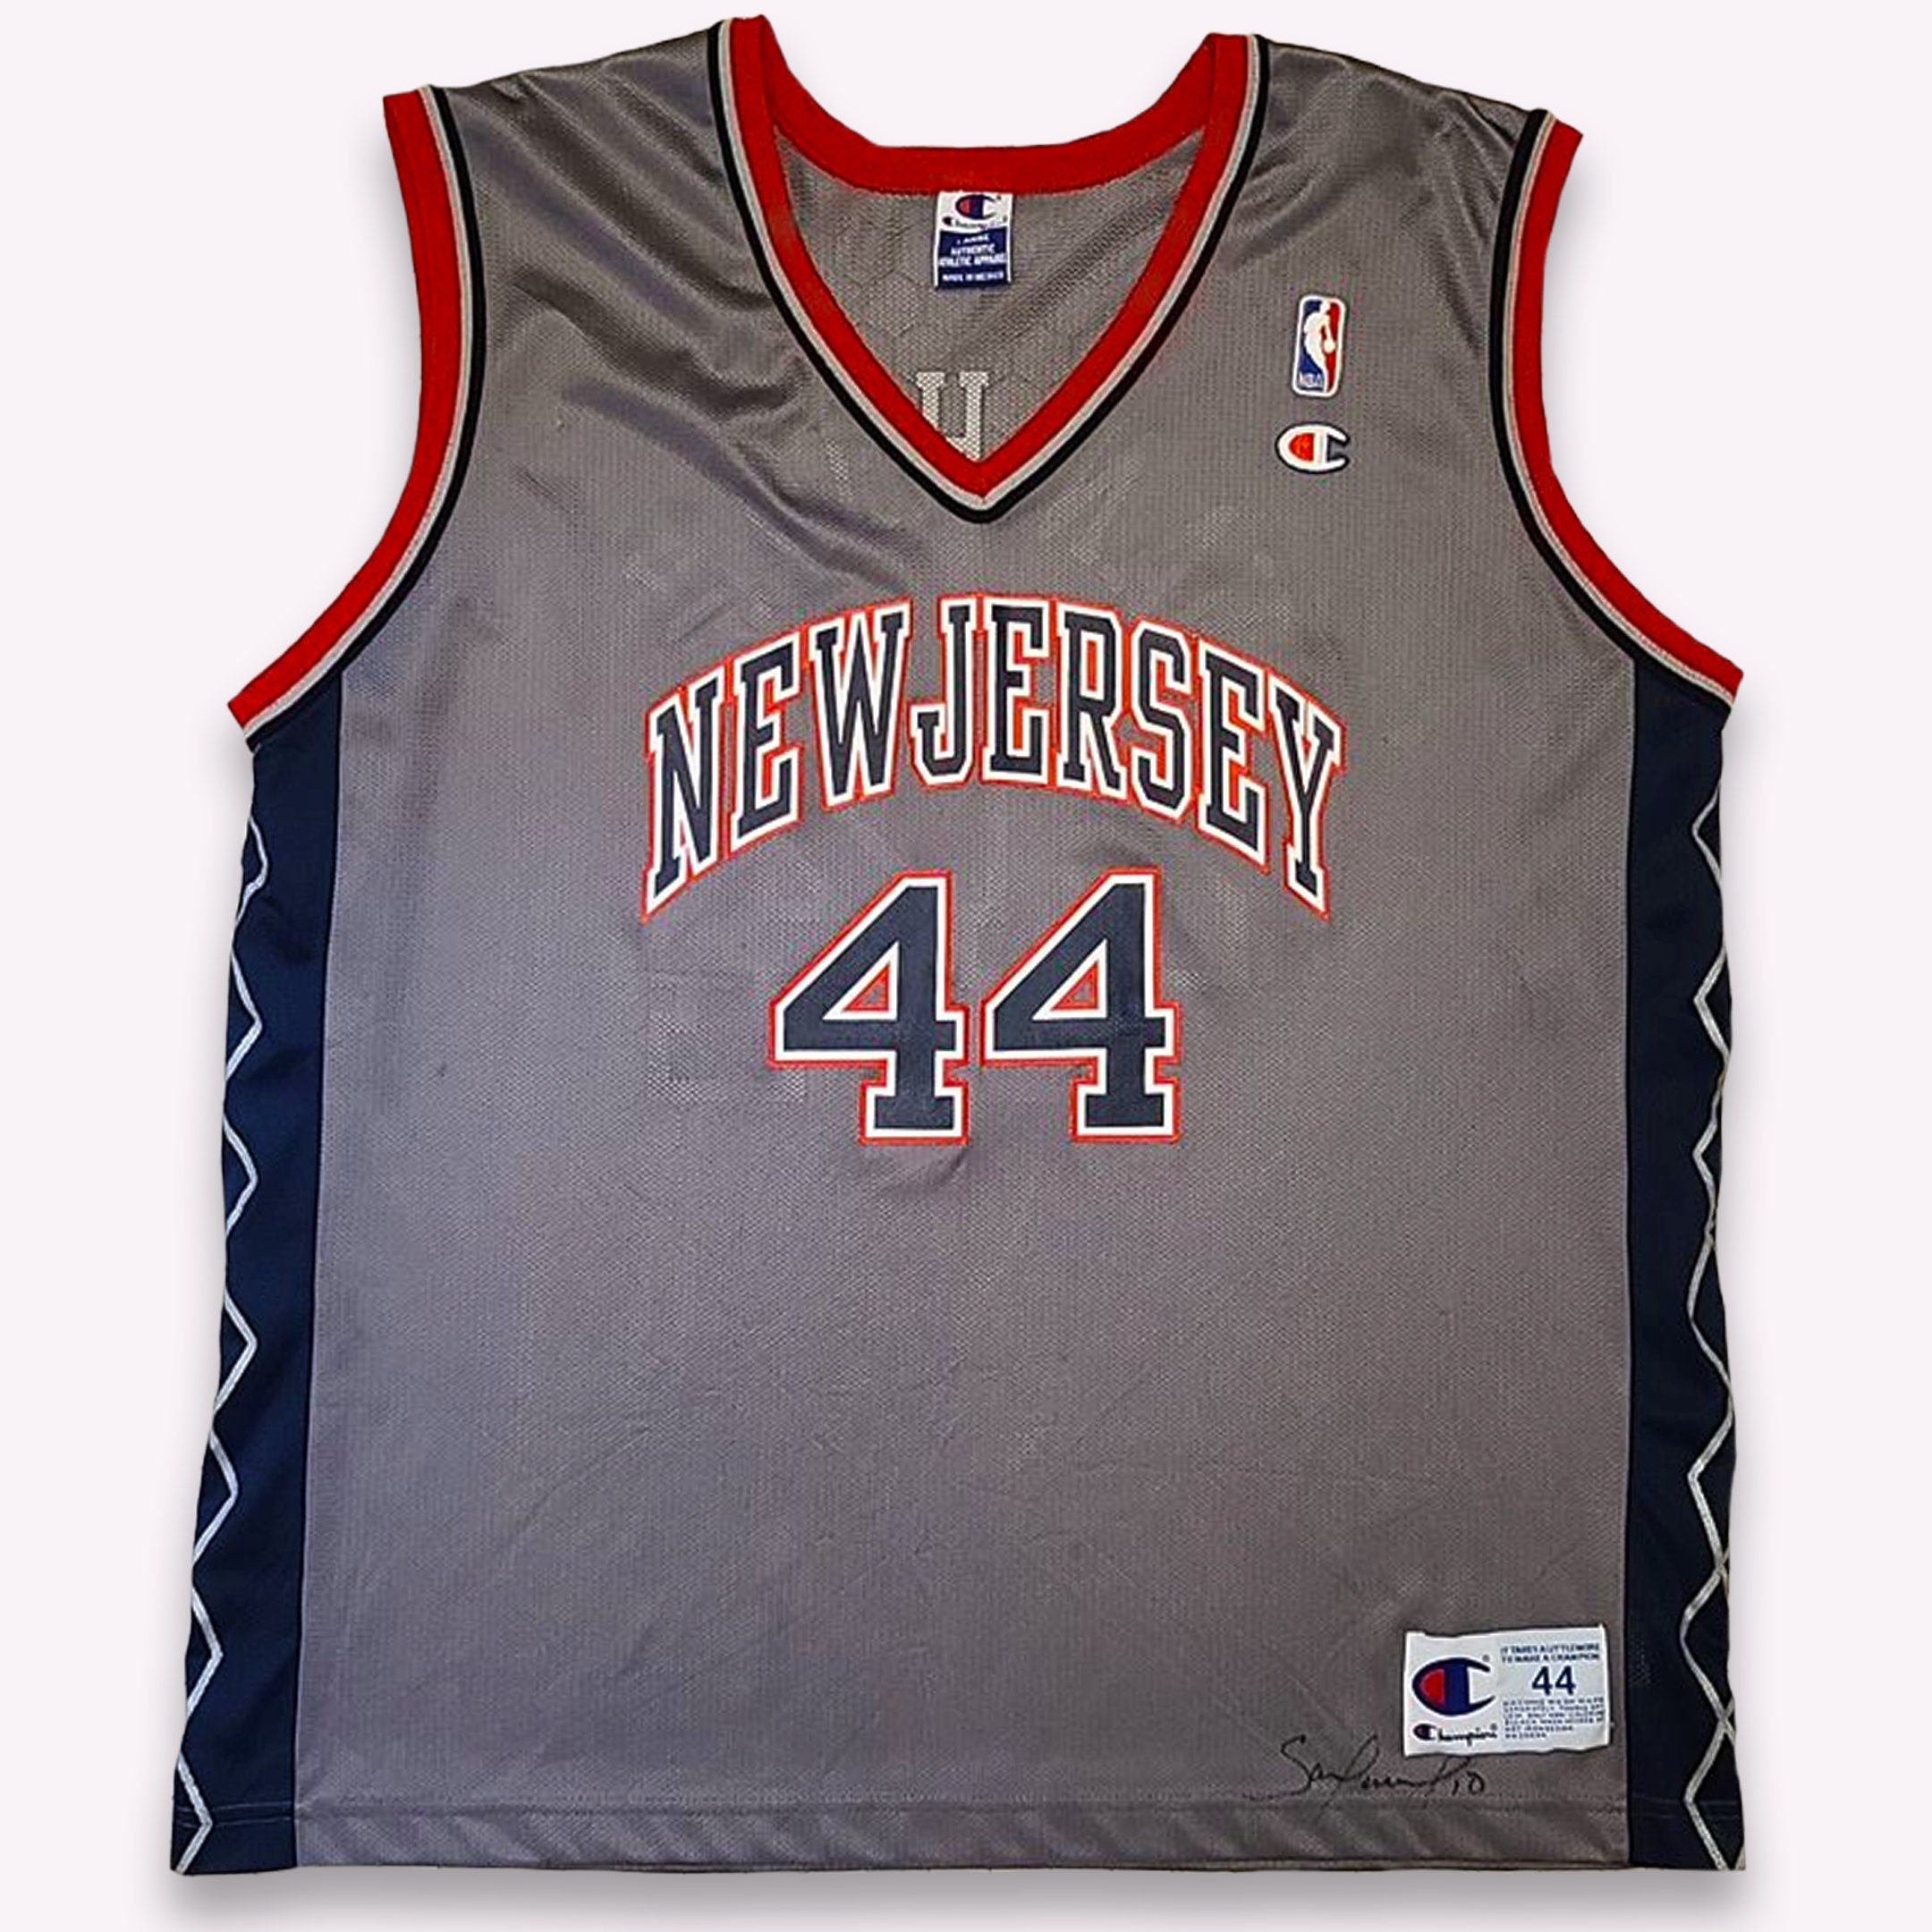 NEW JERSEY NETS 1980's Throwback NBA Jersey Customized Any Name